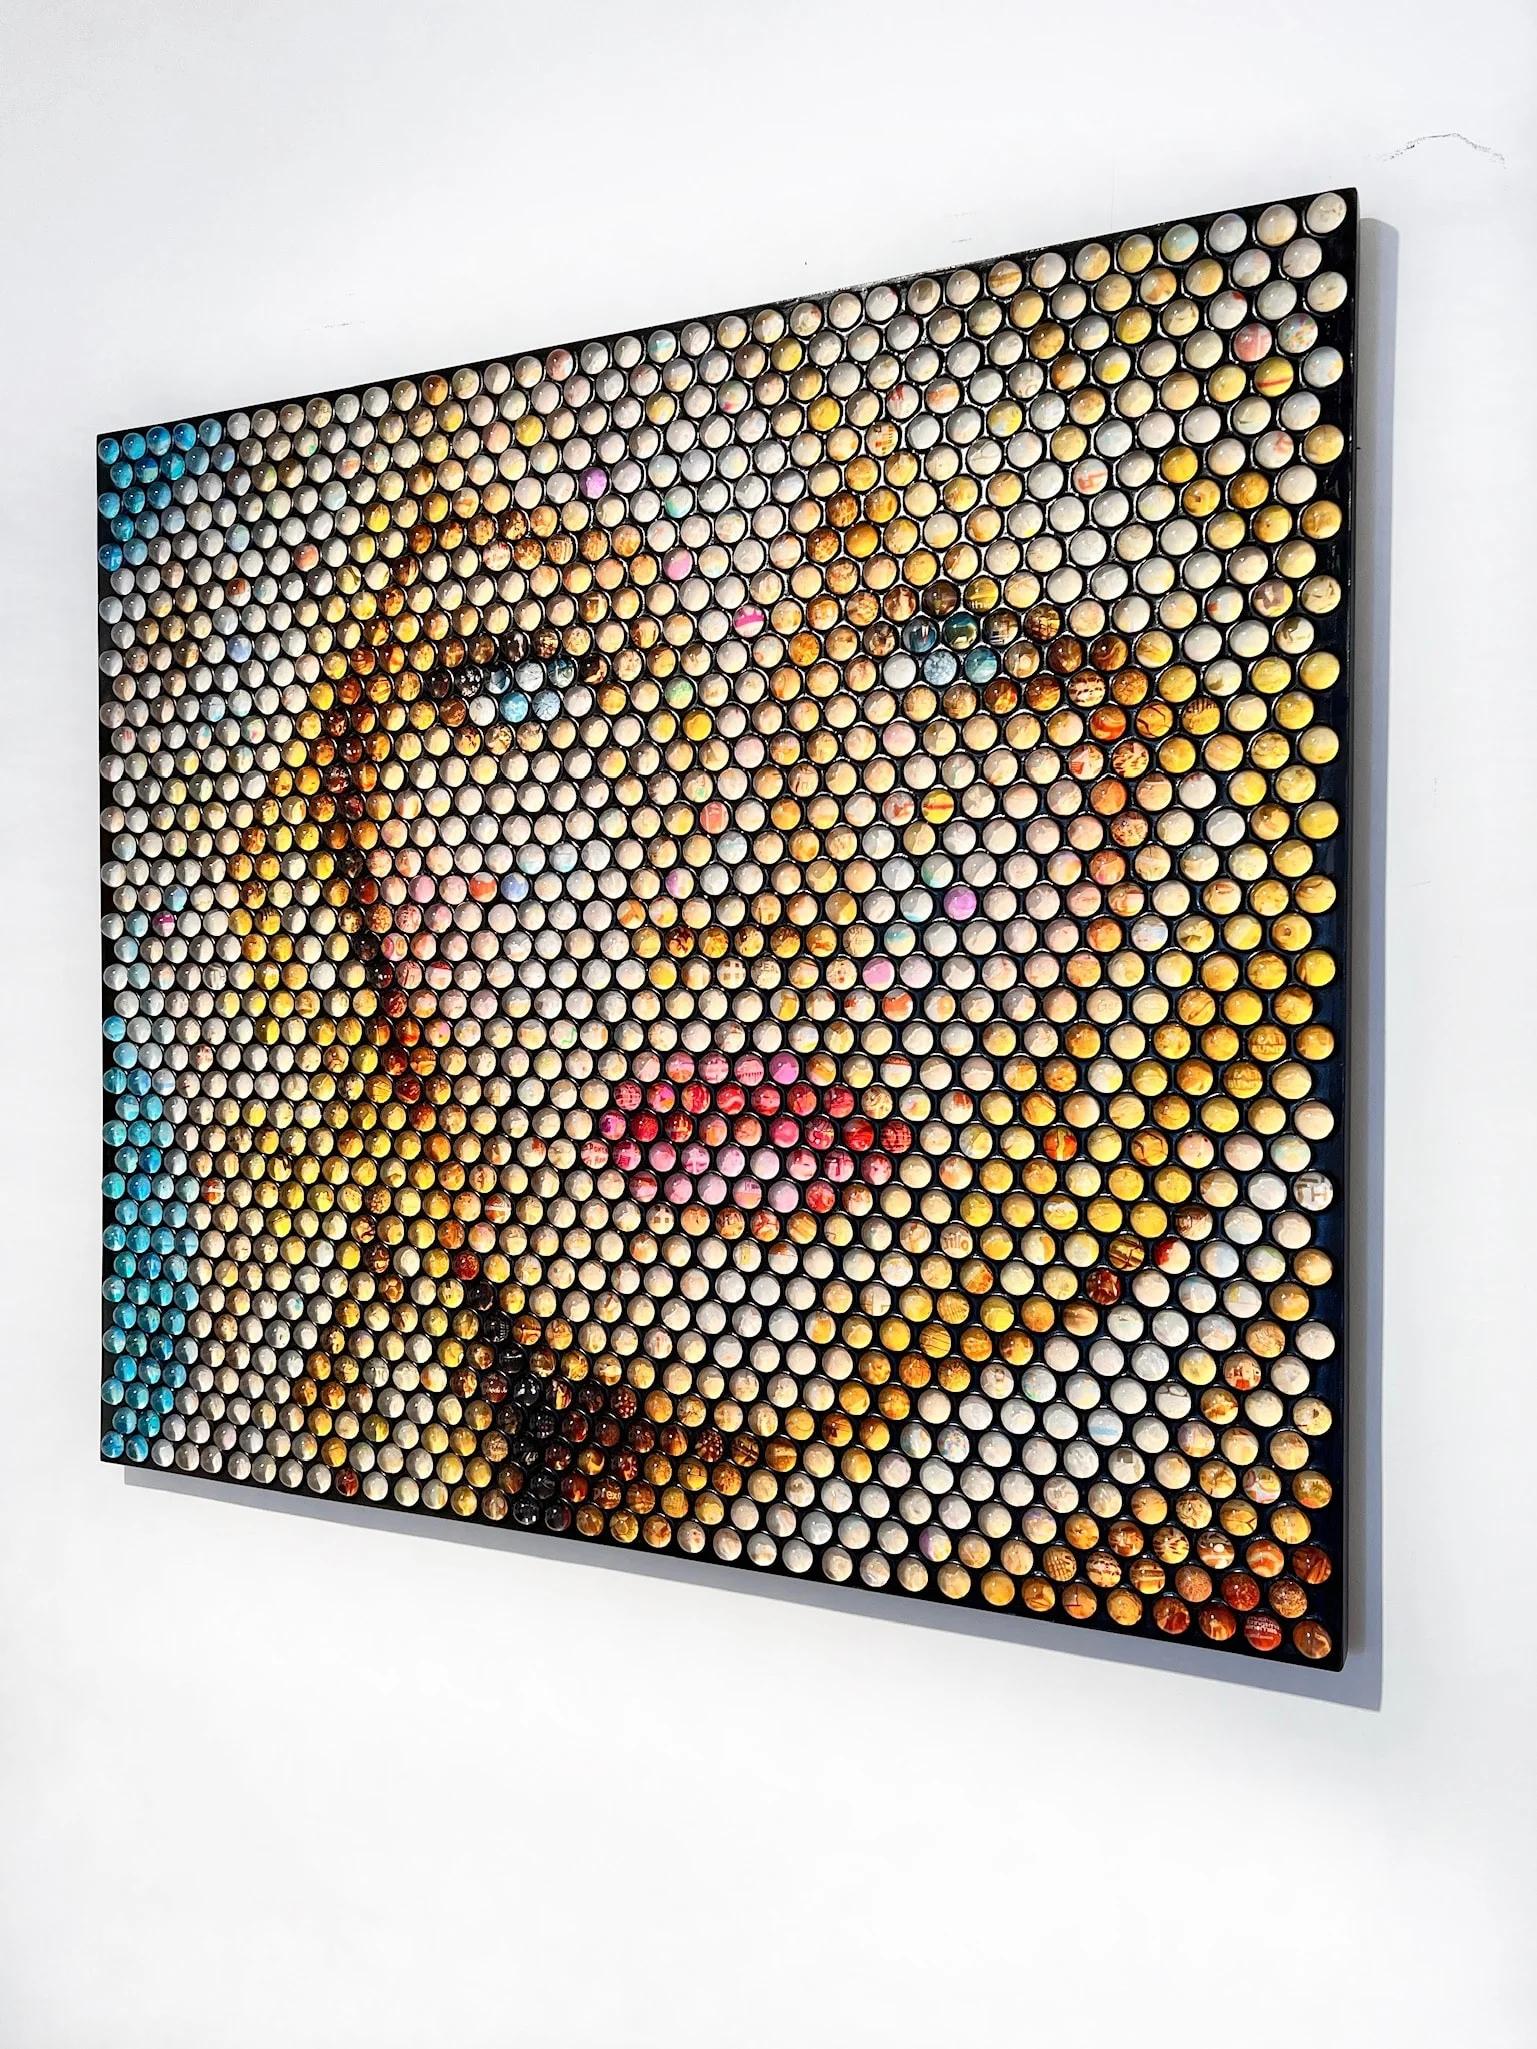 Nemo Jantzen
Legally Blond
Signed by the artist
Photographs, Glass Spheres, Resin on Wood
Content: Luxury, travel, brands, yachts, diamonds etc.
46.5 x 53.5 inches with Ø1.5 inch spheres
This piece is unique. 

This piece is currently on display at